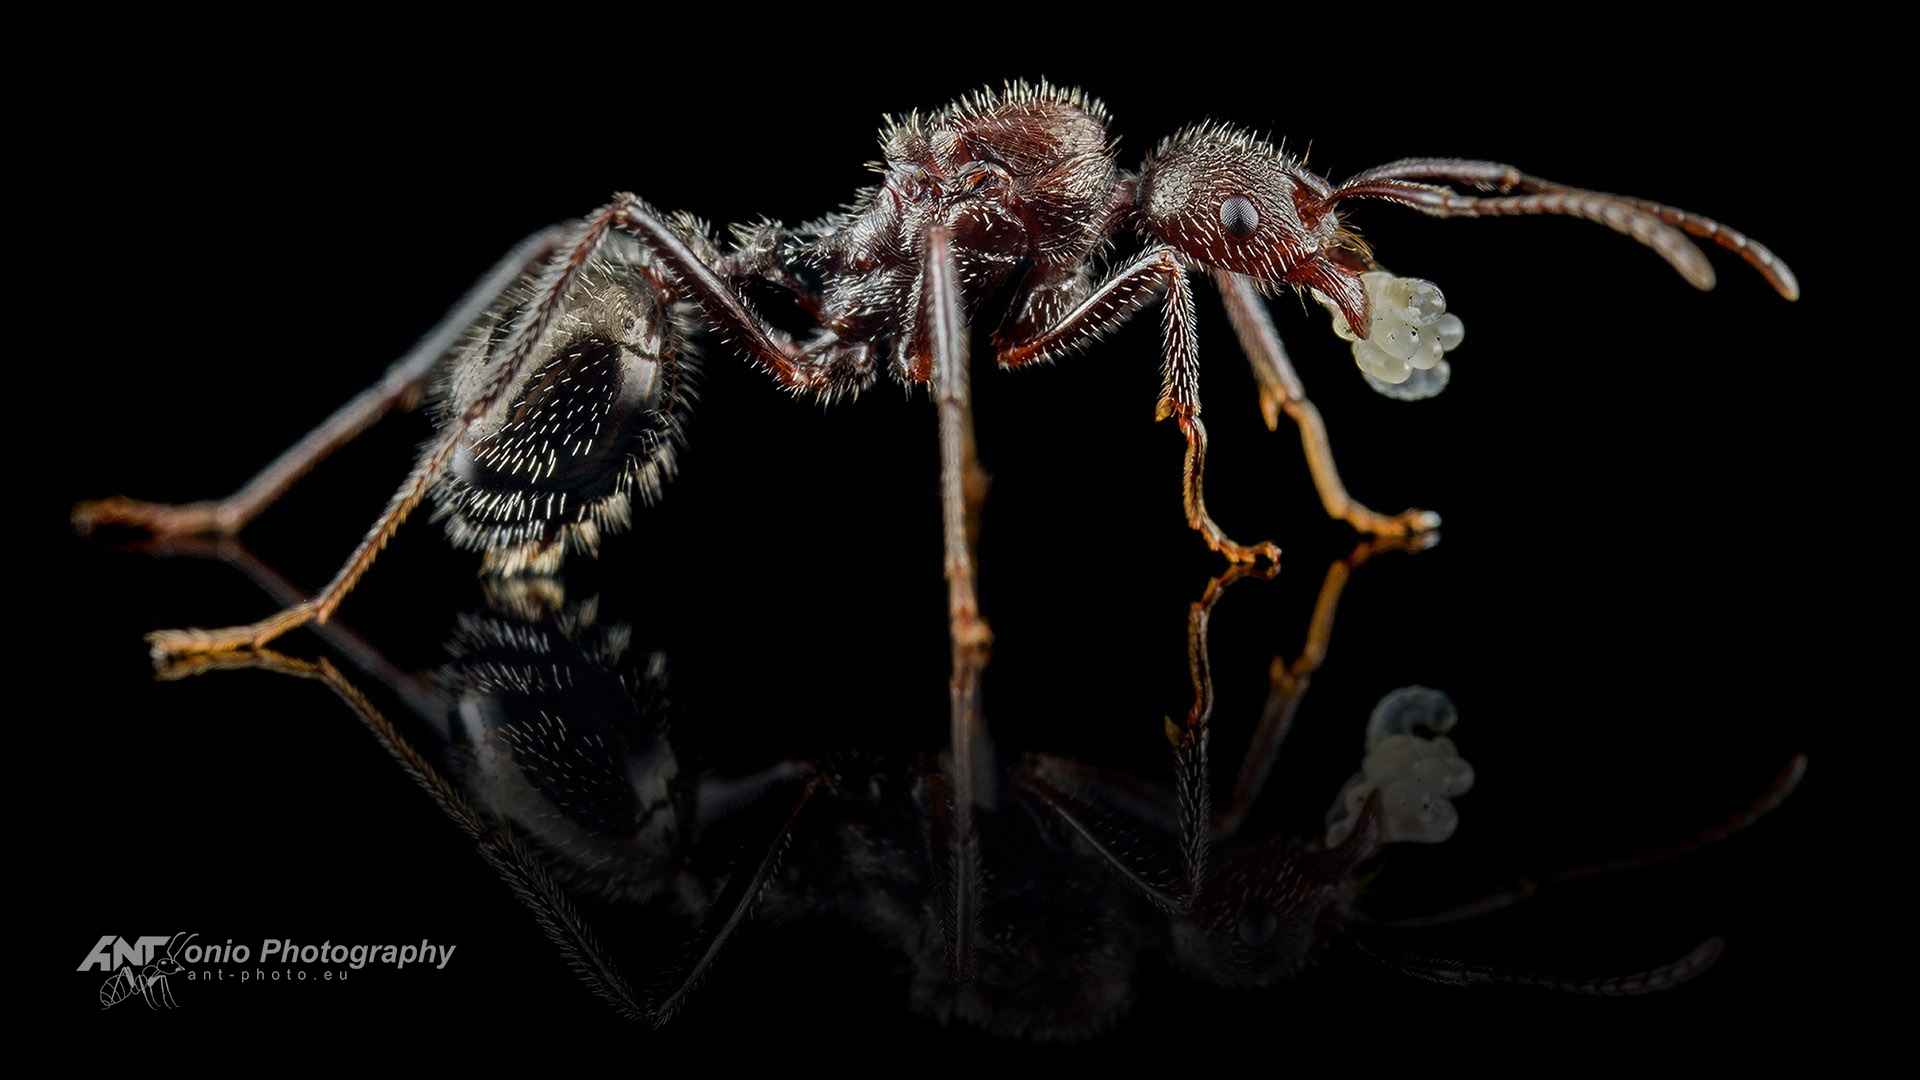 Ant Aphaenogaster sp. from Greace